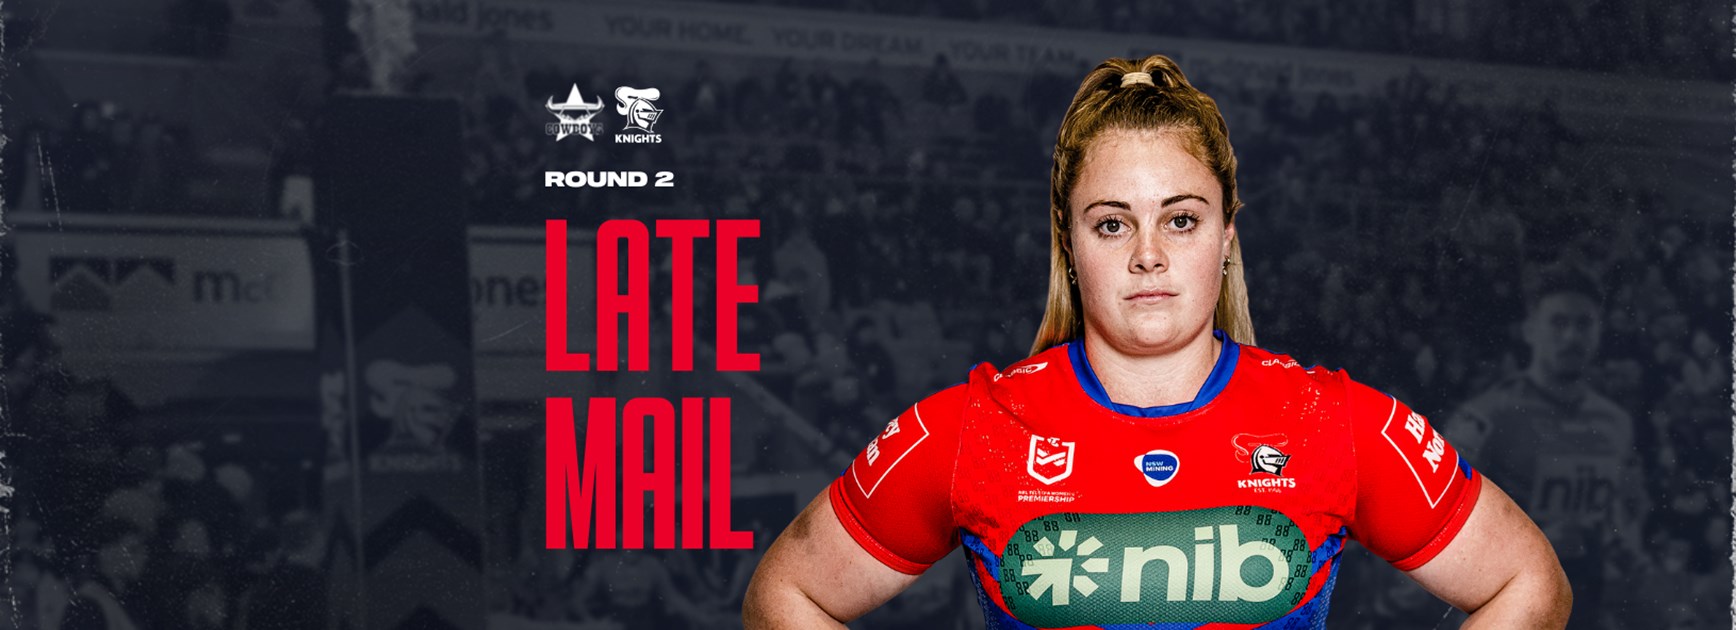 NRLW Late Mail: Team confirmed for Cowboys clash